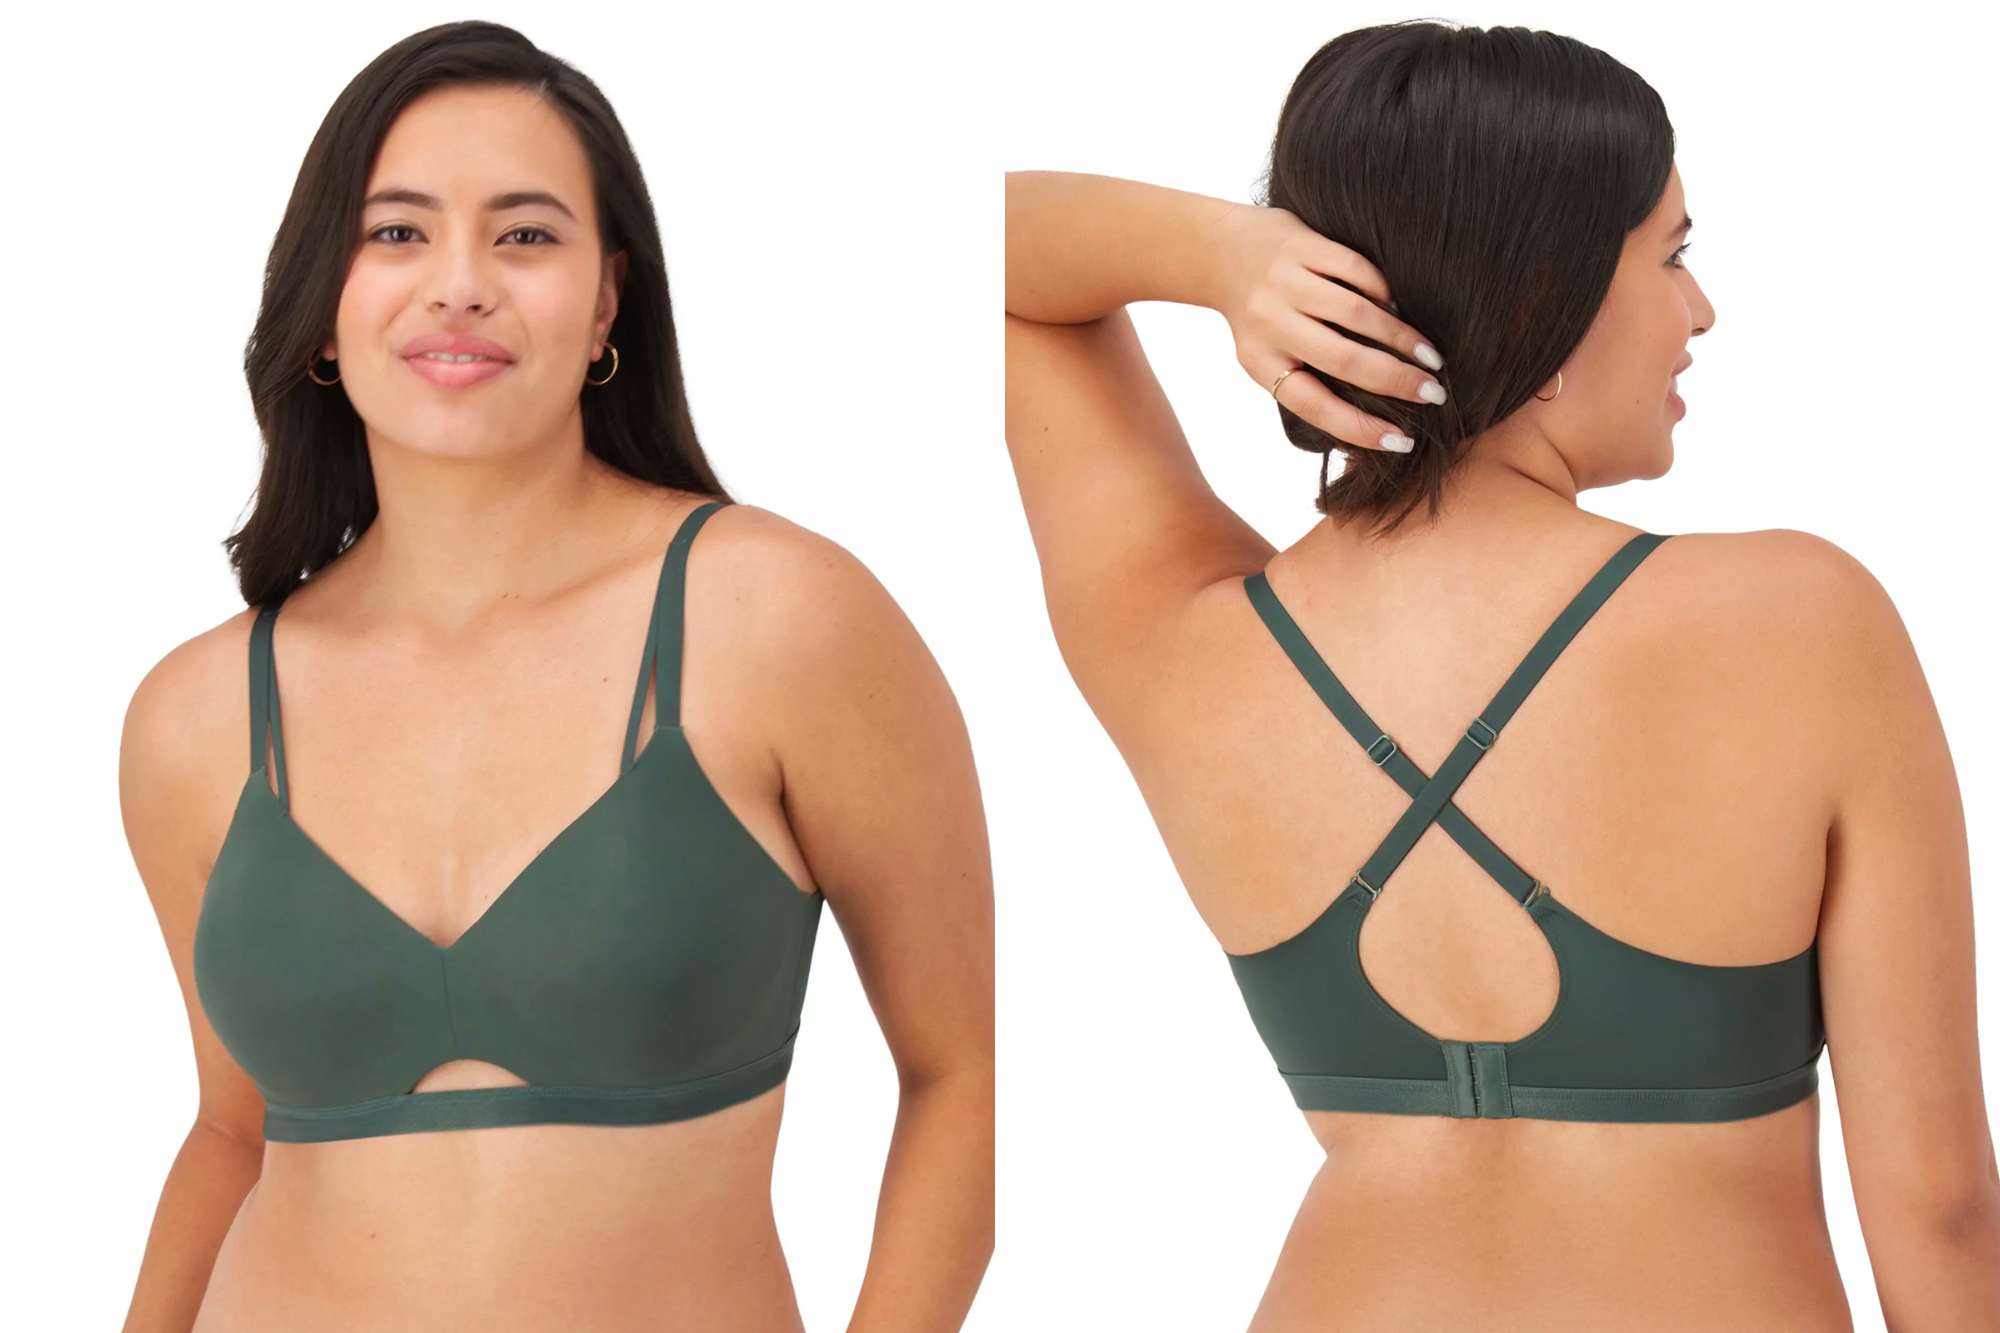 If You're Looking for a Bra You Won't Want to Rip Off, This